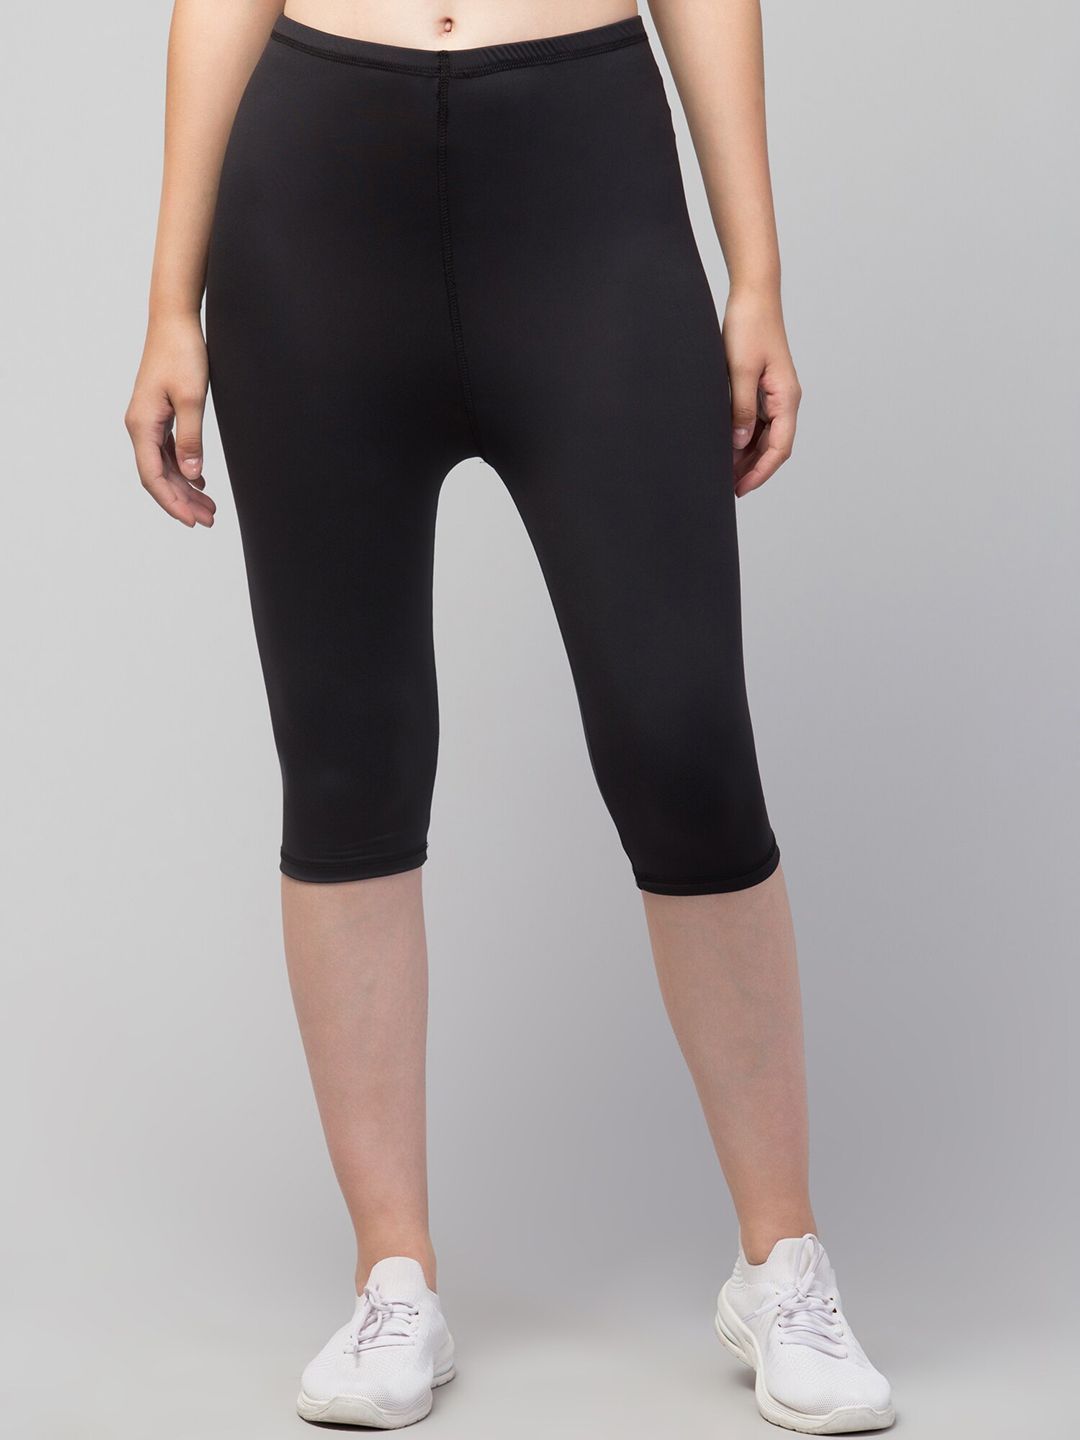 Apraa & Parma Women Black Solid Dry-Fit High-Rise Yoga Tights Price in India